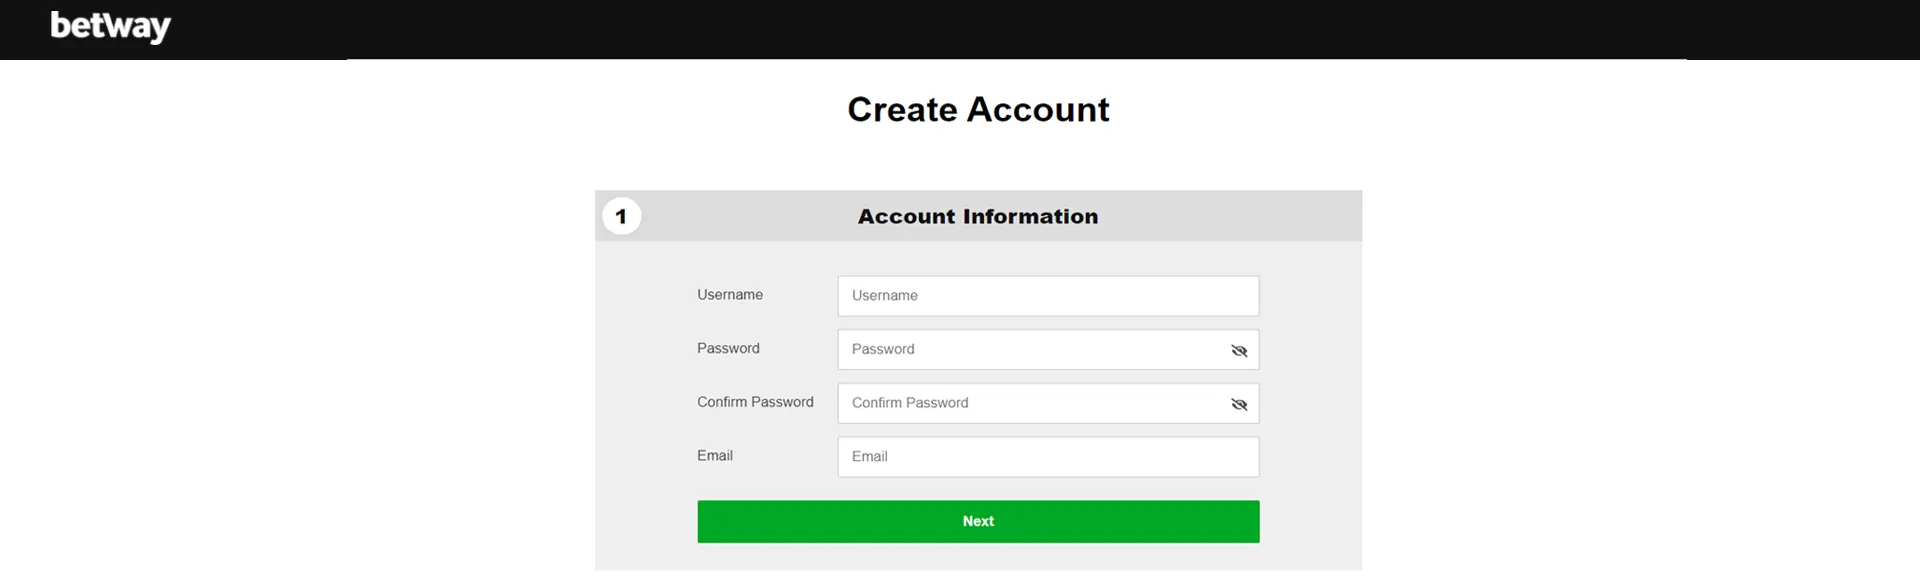 The Betway registration page for creating an account.